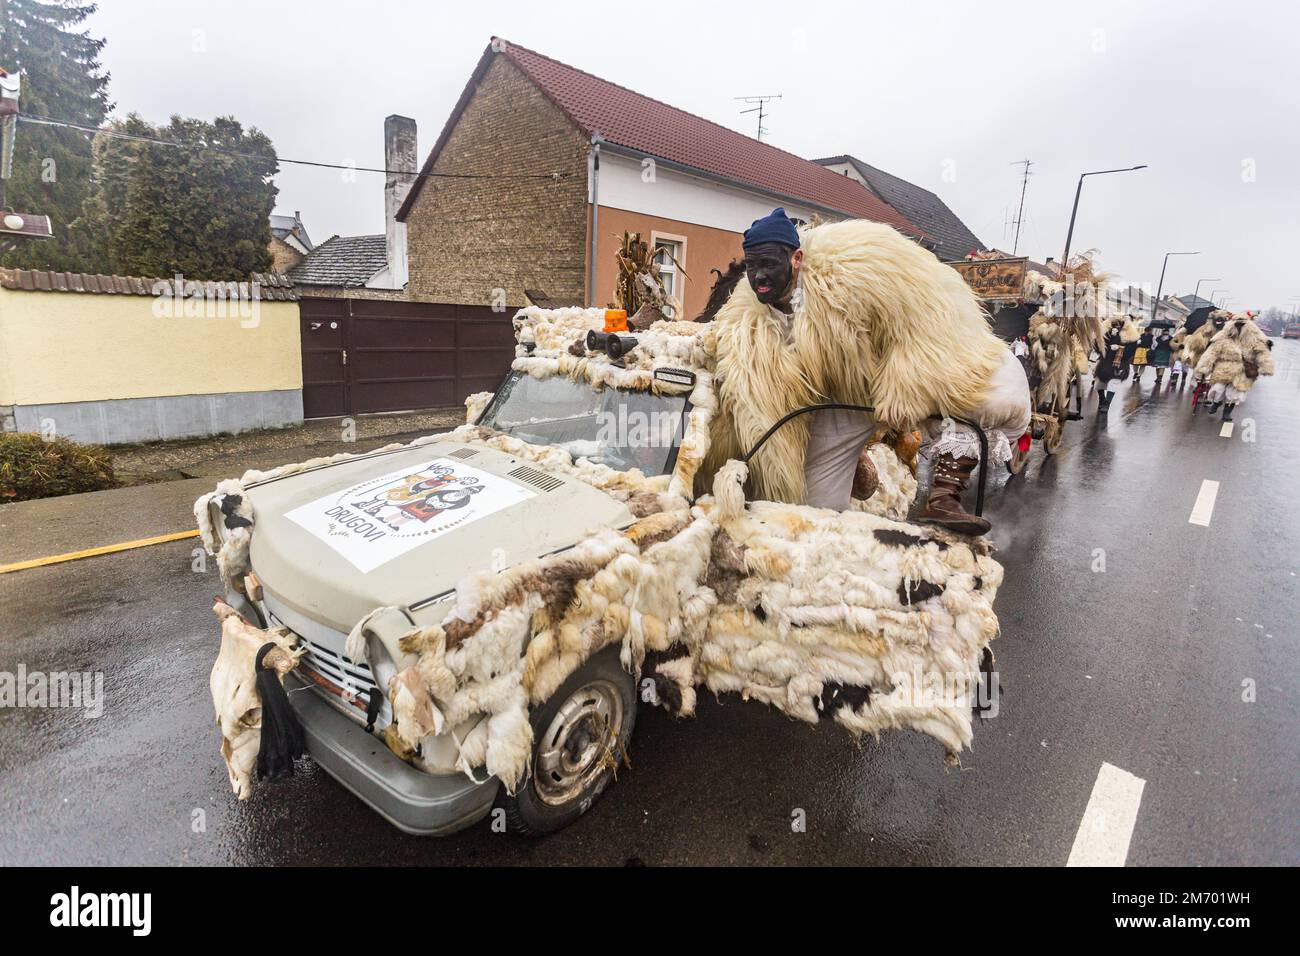 Buso group with a makeshift vehicle dressed up for the annual buso festivities / Poklade in Mohacs, Hungary Stock Photo